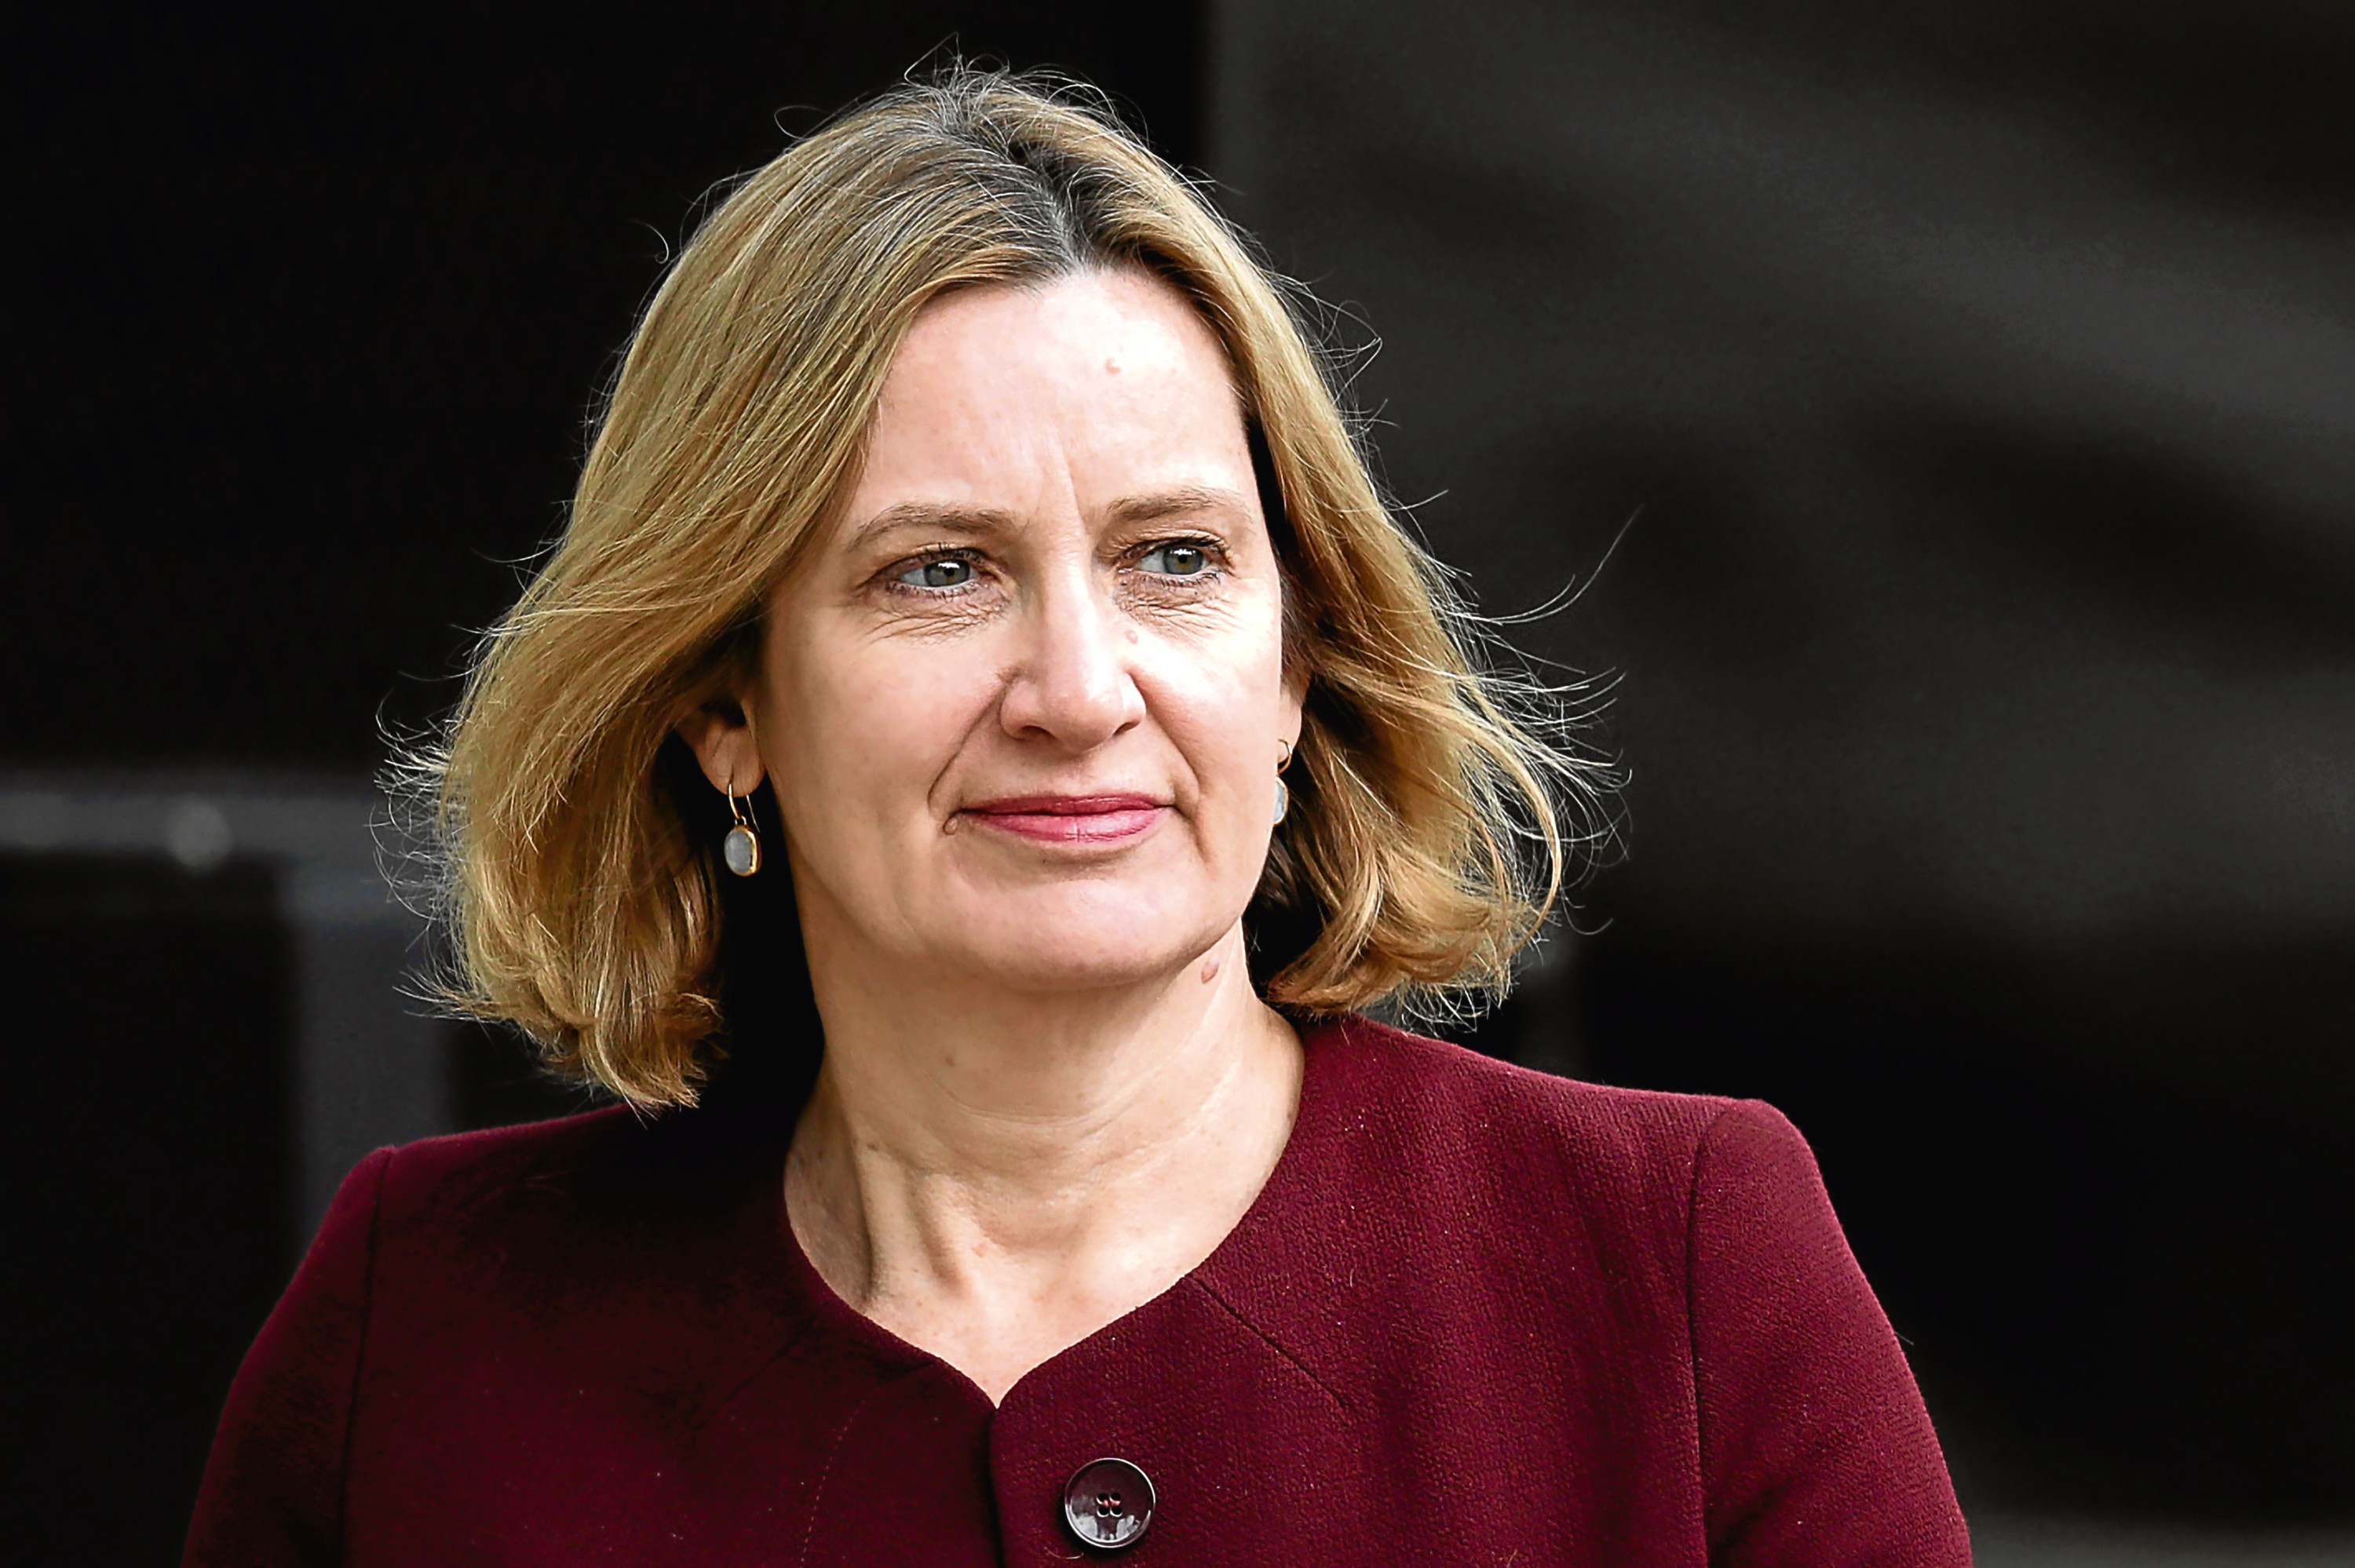 Amber Rudd has resigned as home secretary over claims she had misled parliament.